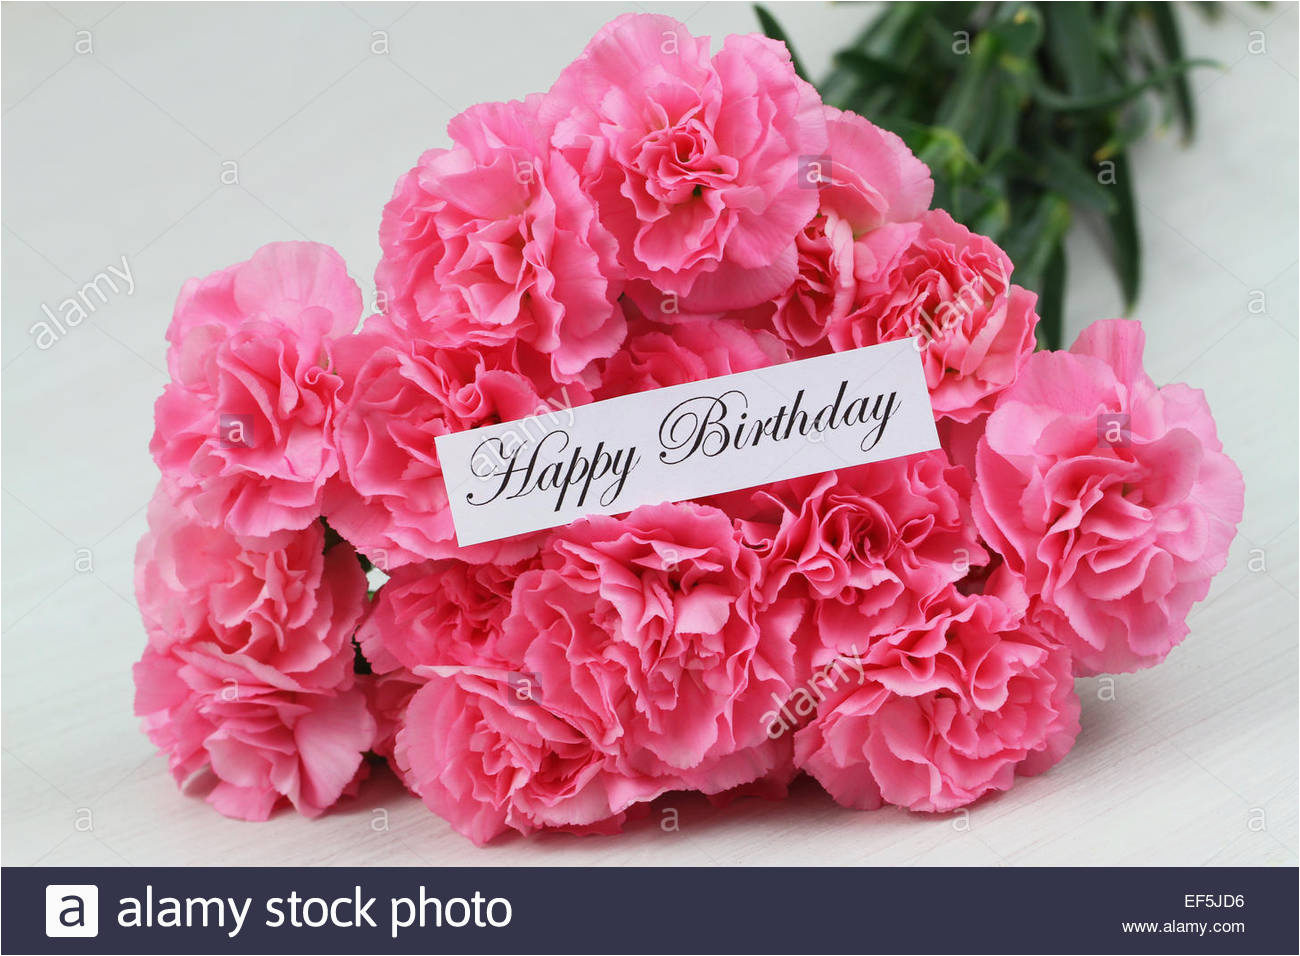 happy birthday card with pink carnation flowers stock